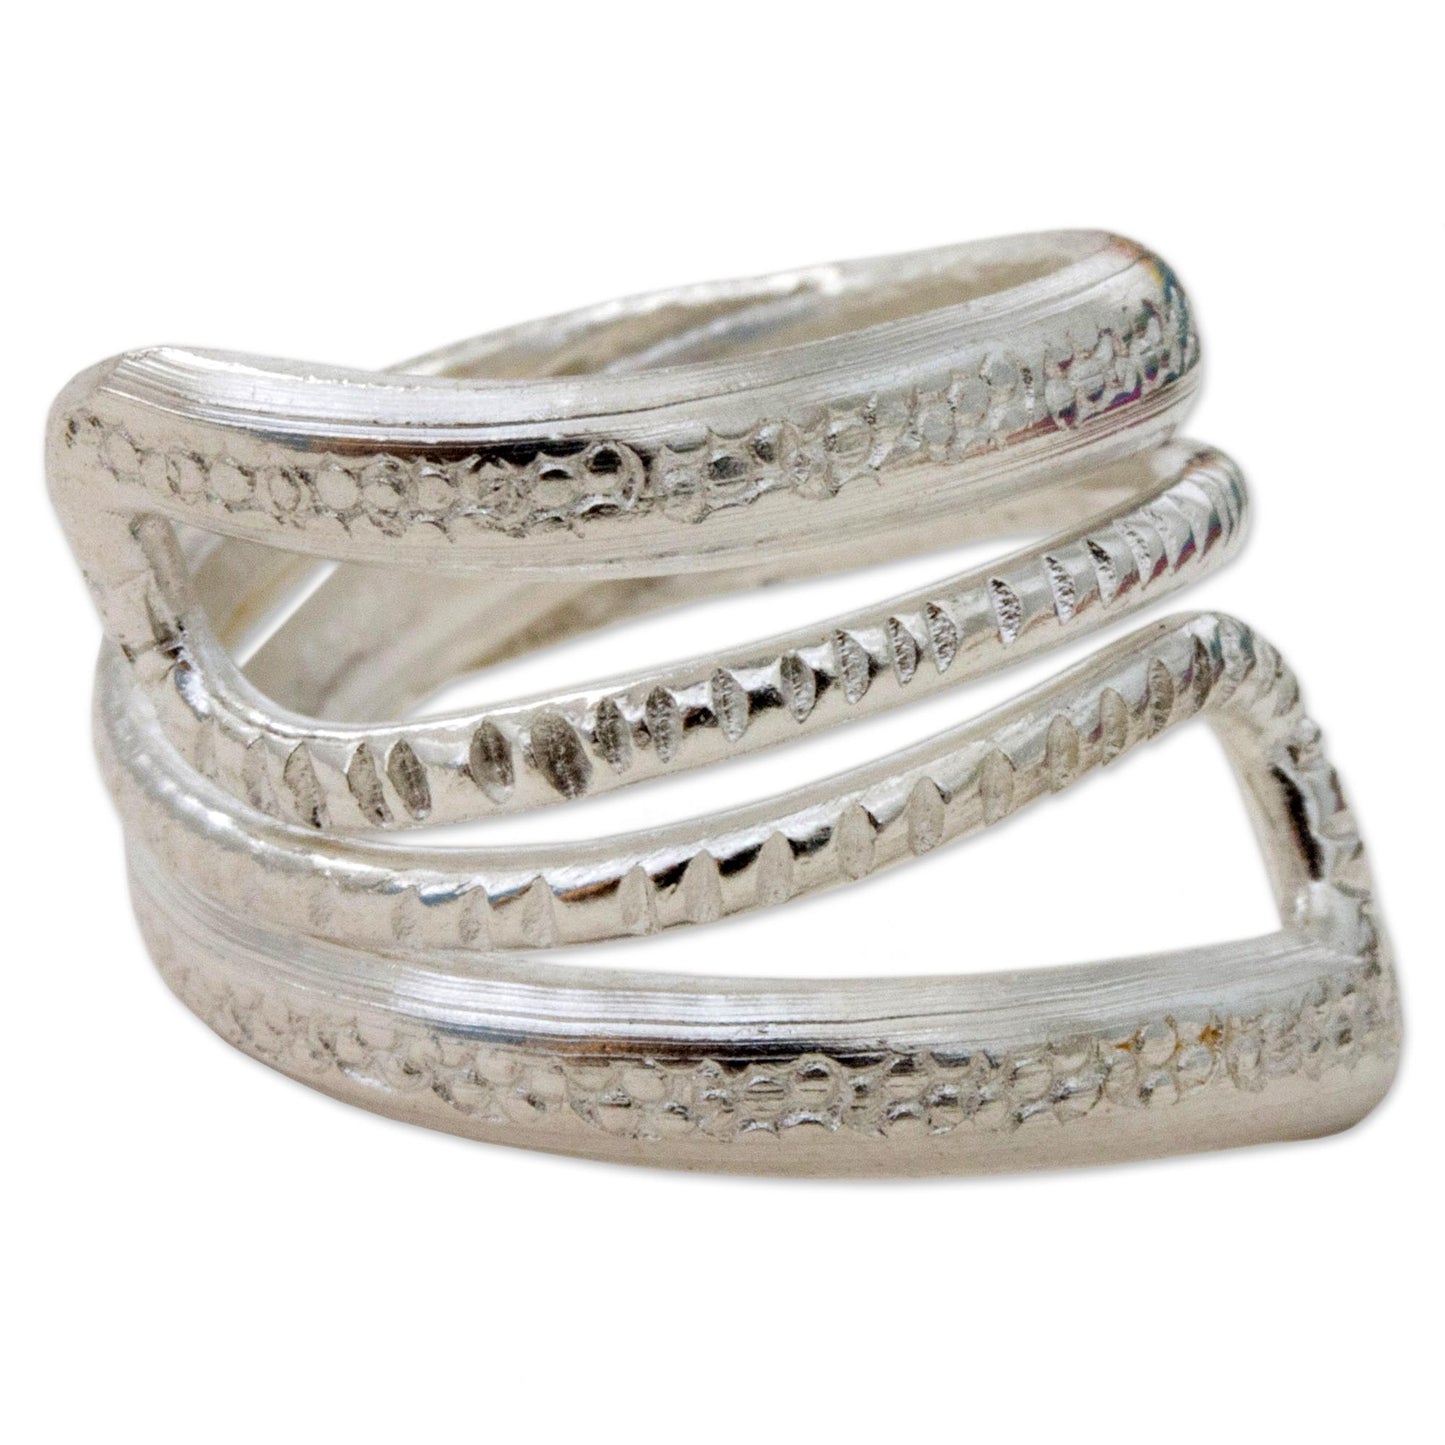 Snake Path High Polish Textured Sterling Silver Wrap Ring Thailand